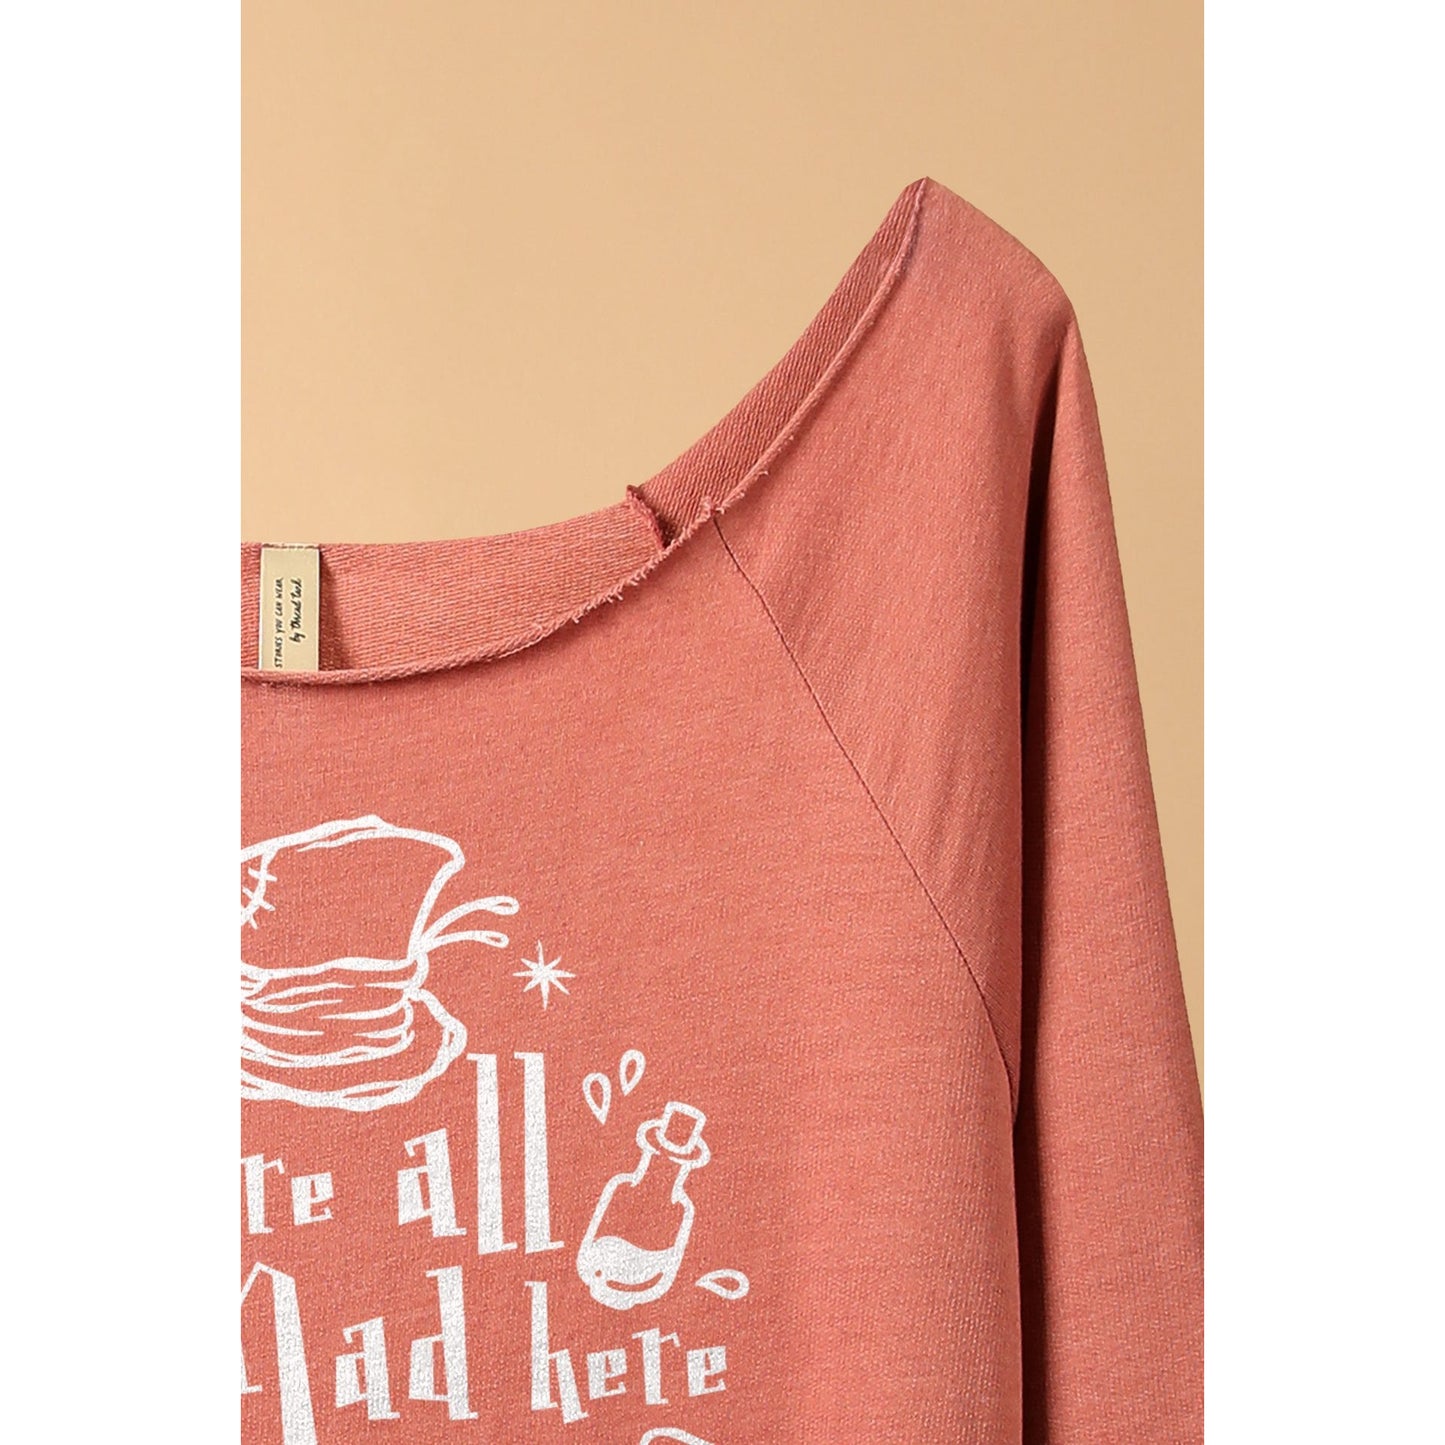 We're all quite mad here you'll fit right in - threadtank | stories you can wear